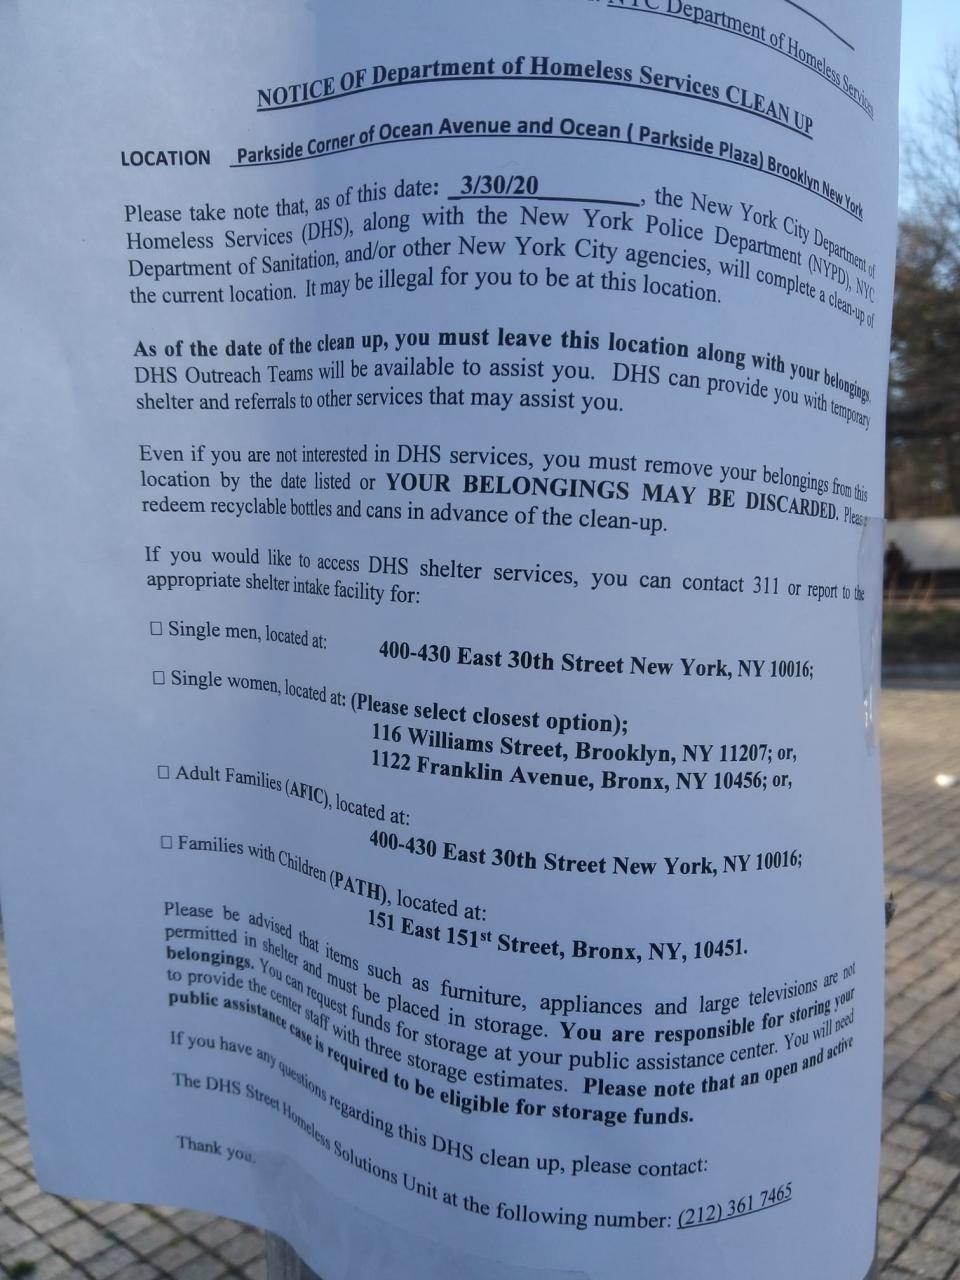 A notice in Prospect Lefferts Gardens tells street homeless people it may be illegal for them to stay in the area and others them shelter options. (Courtesy of Ignacio Choi)